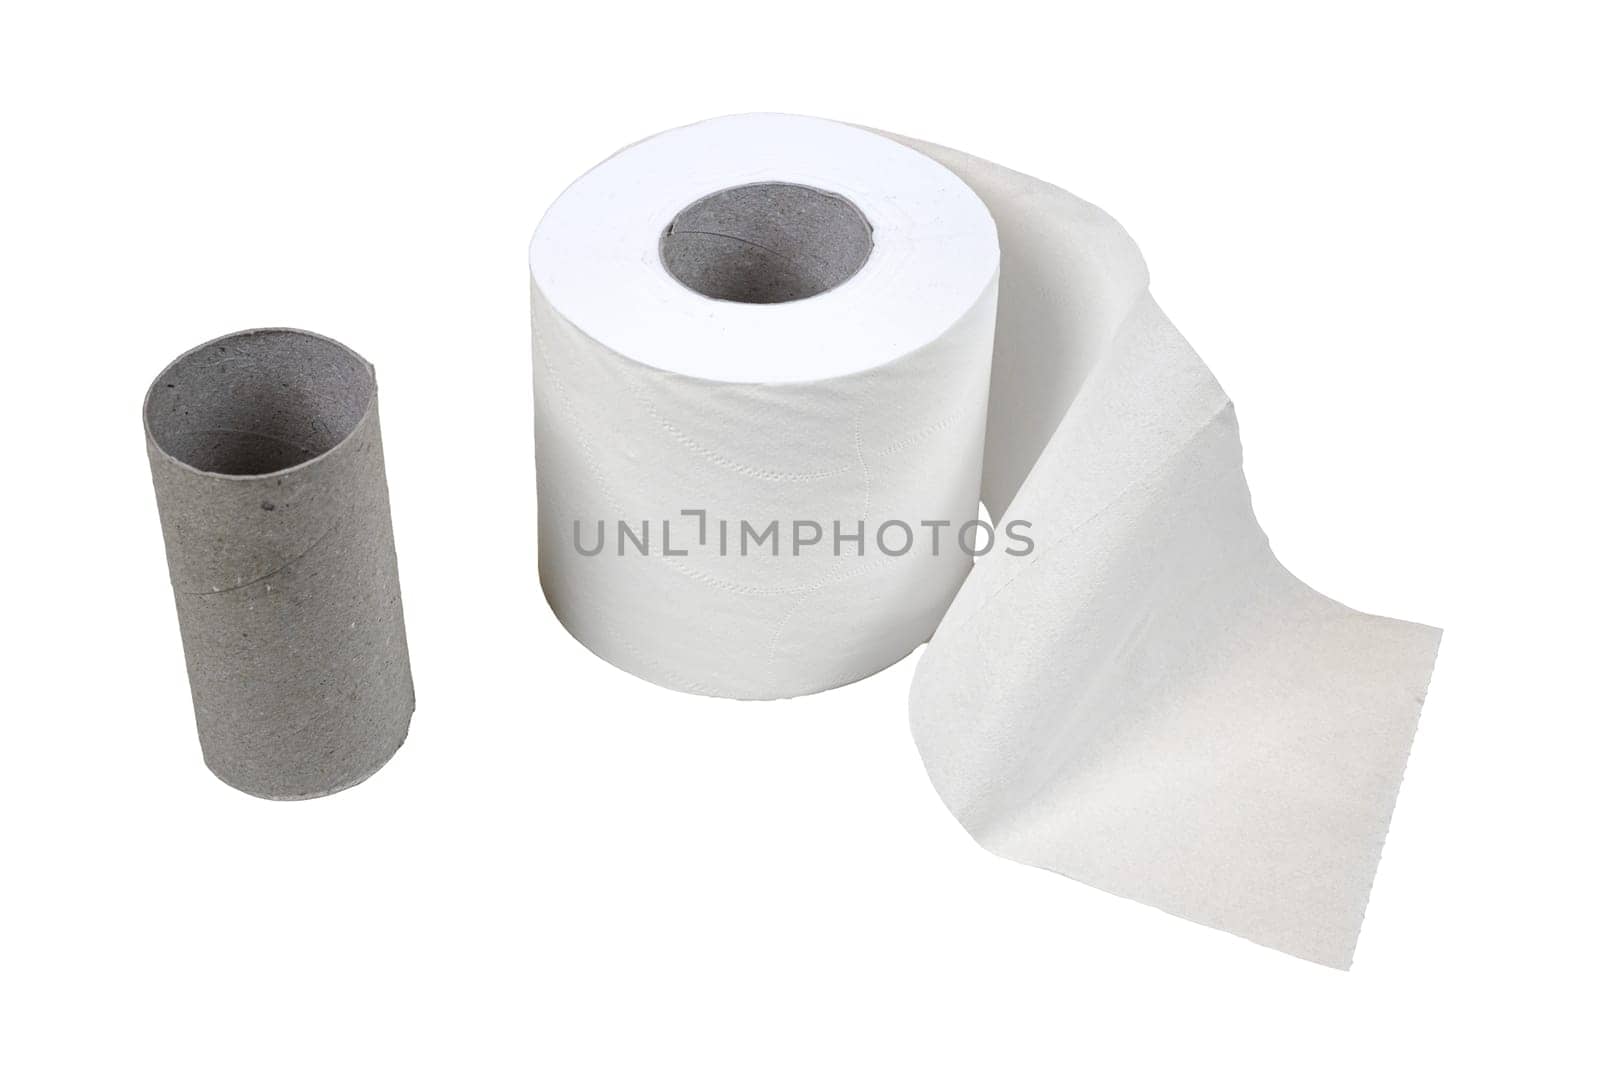 one whole and one finished toilet paper roll on a transparent background